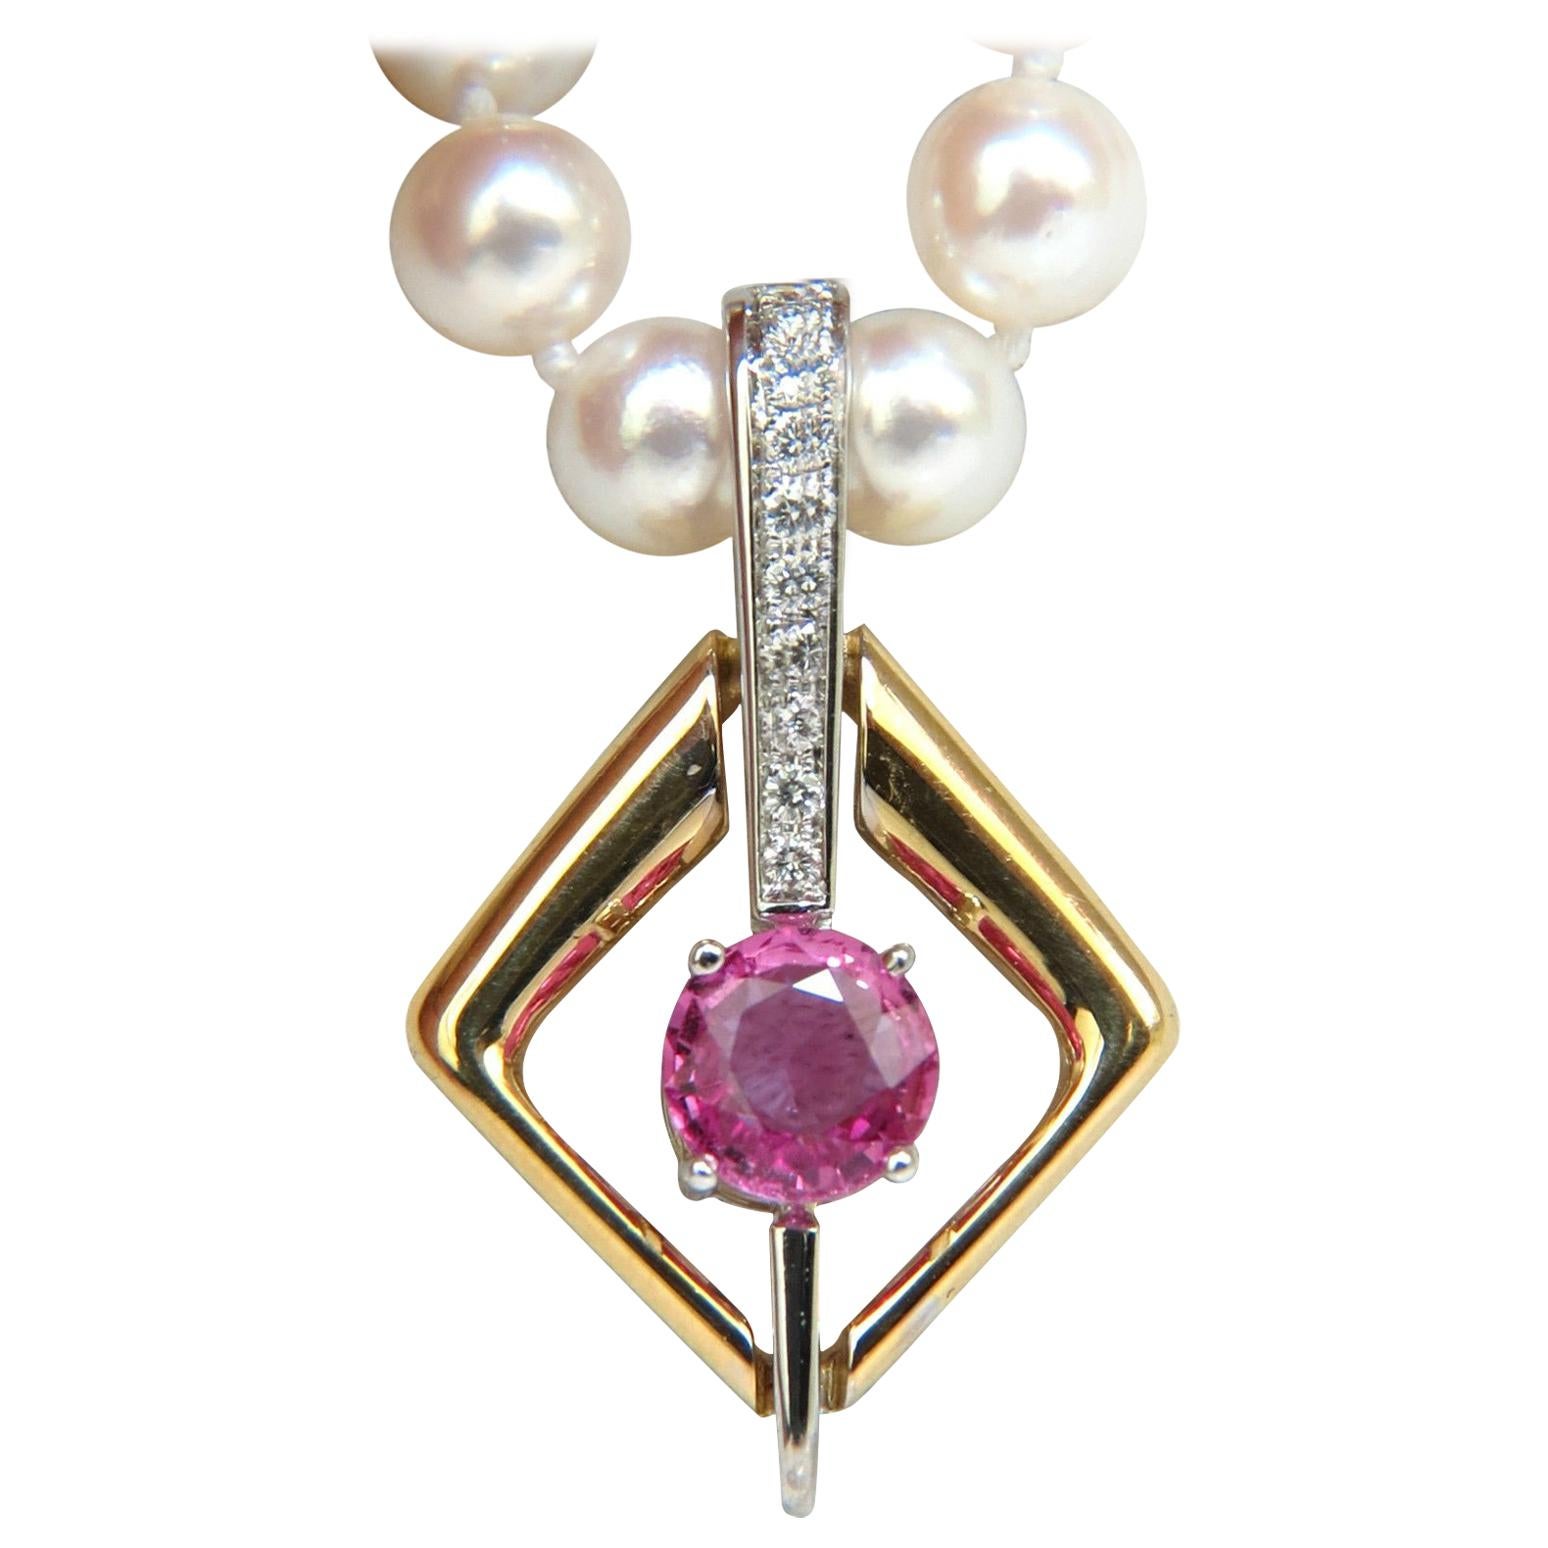 18KT 1.83CT Natural Vivid Pink Sapphire Enhancer and Japanese Pearl Necklace